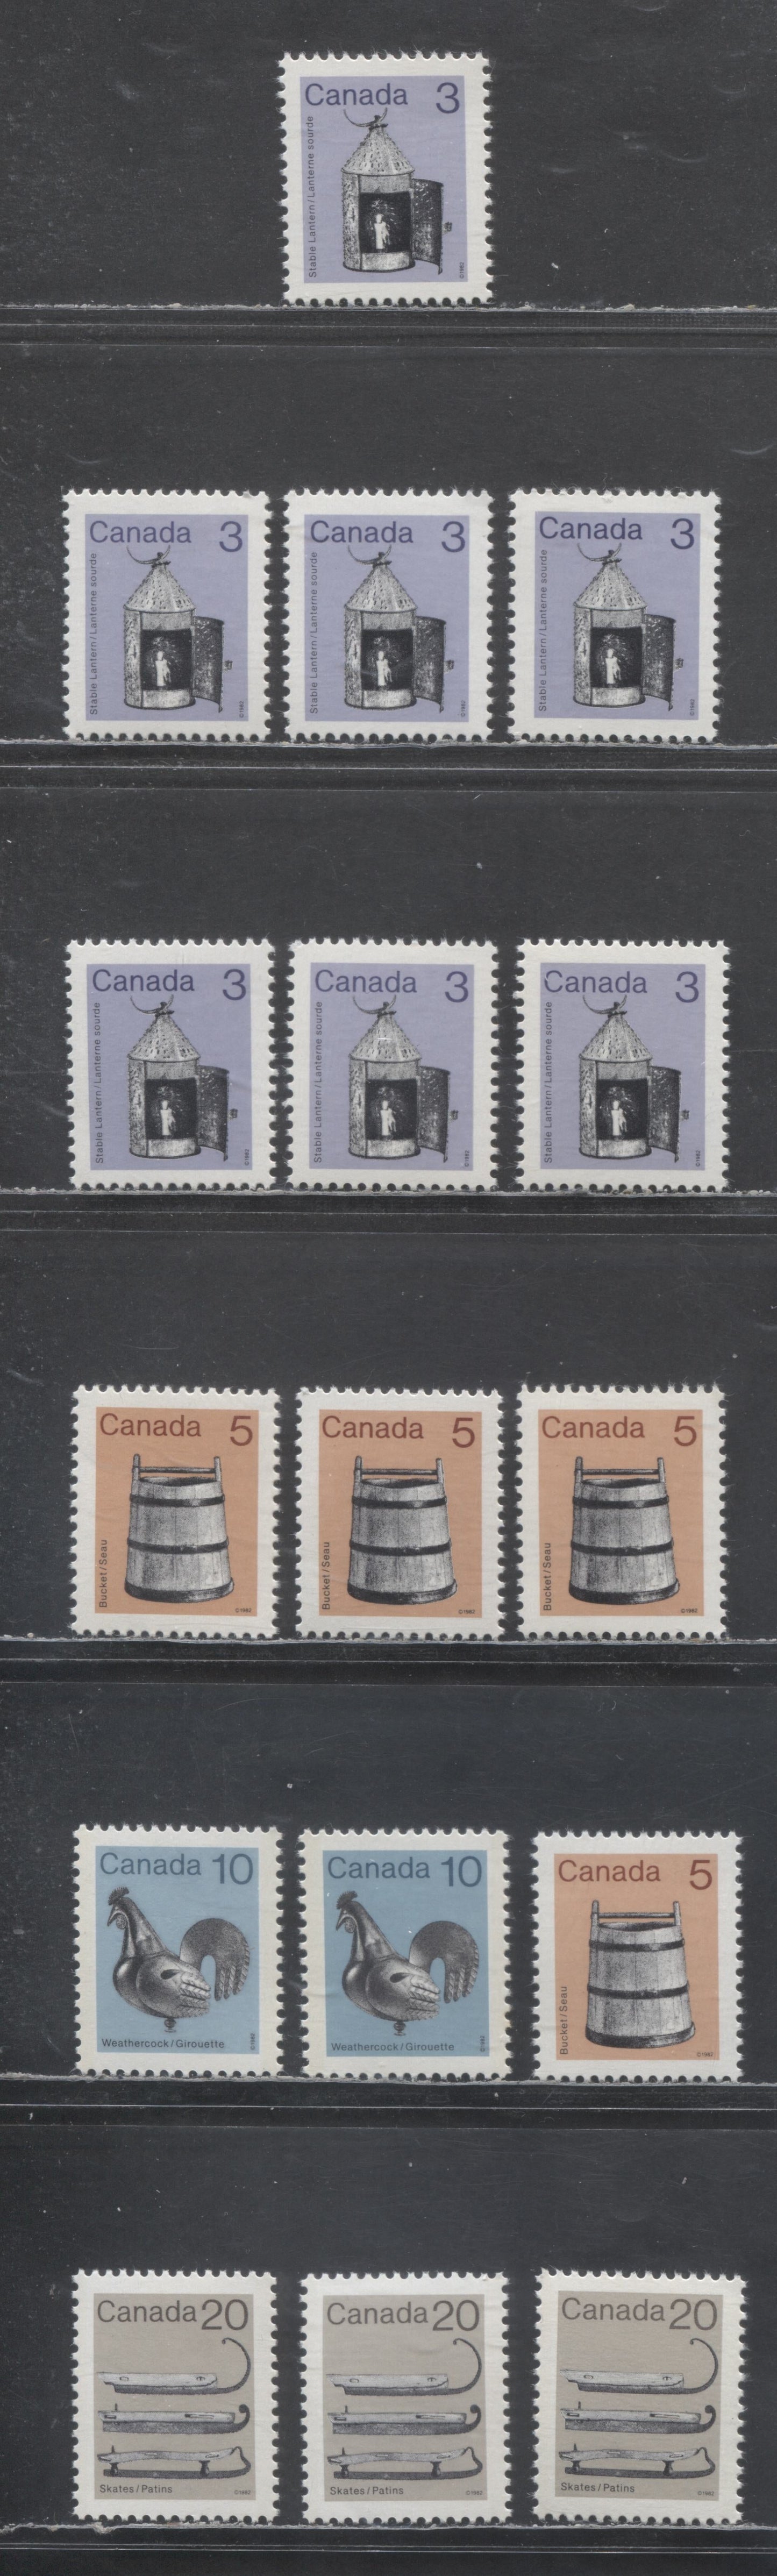 Lot 300 Canada #919-919ii, 920, 921, 922 3c-20c Purple/Gray Brown & Multicolored Lantern-Ice Skates, 1982-1897 Low-Value Artifact Definitives, 16 VFNH Singles With Many Unlisted Variations, Abitibi Paper Printings